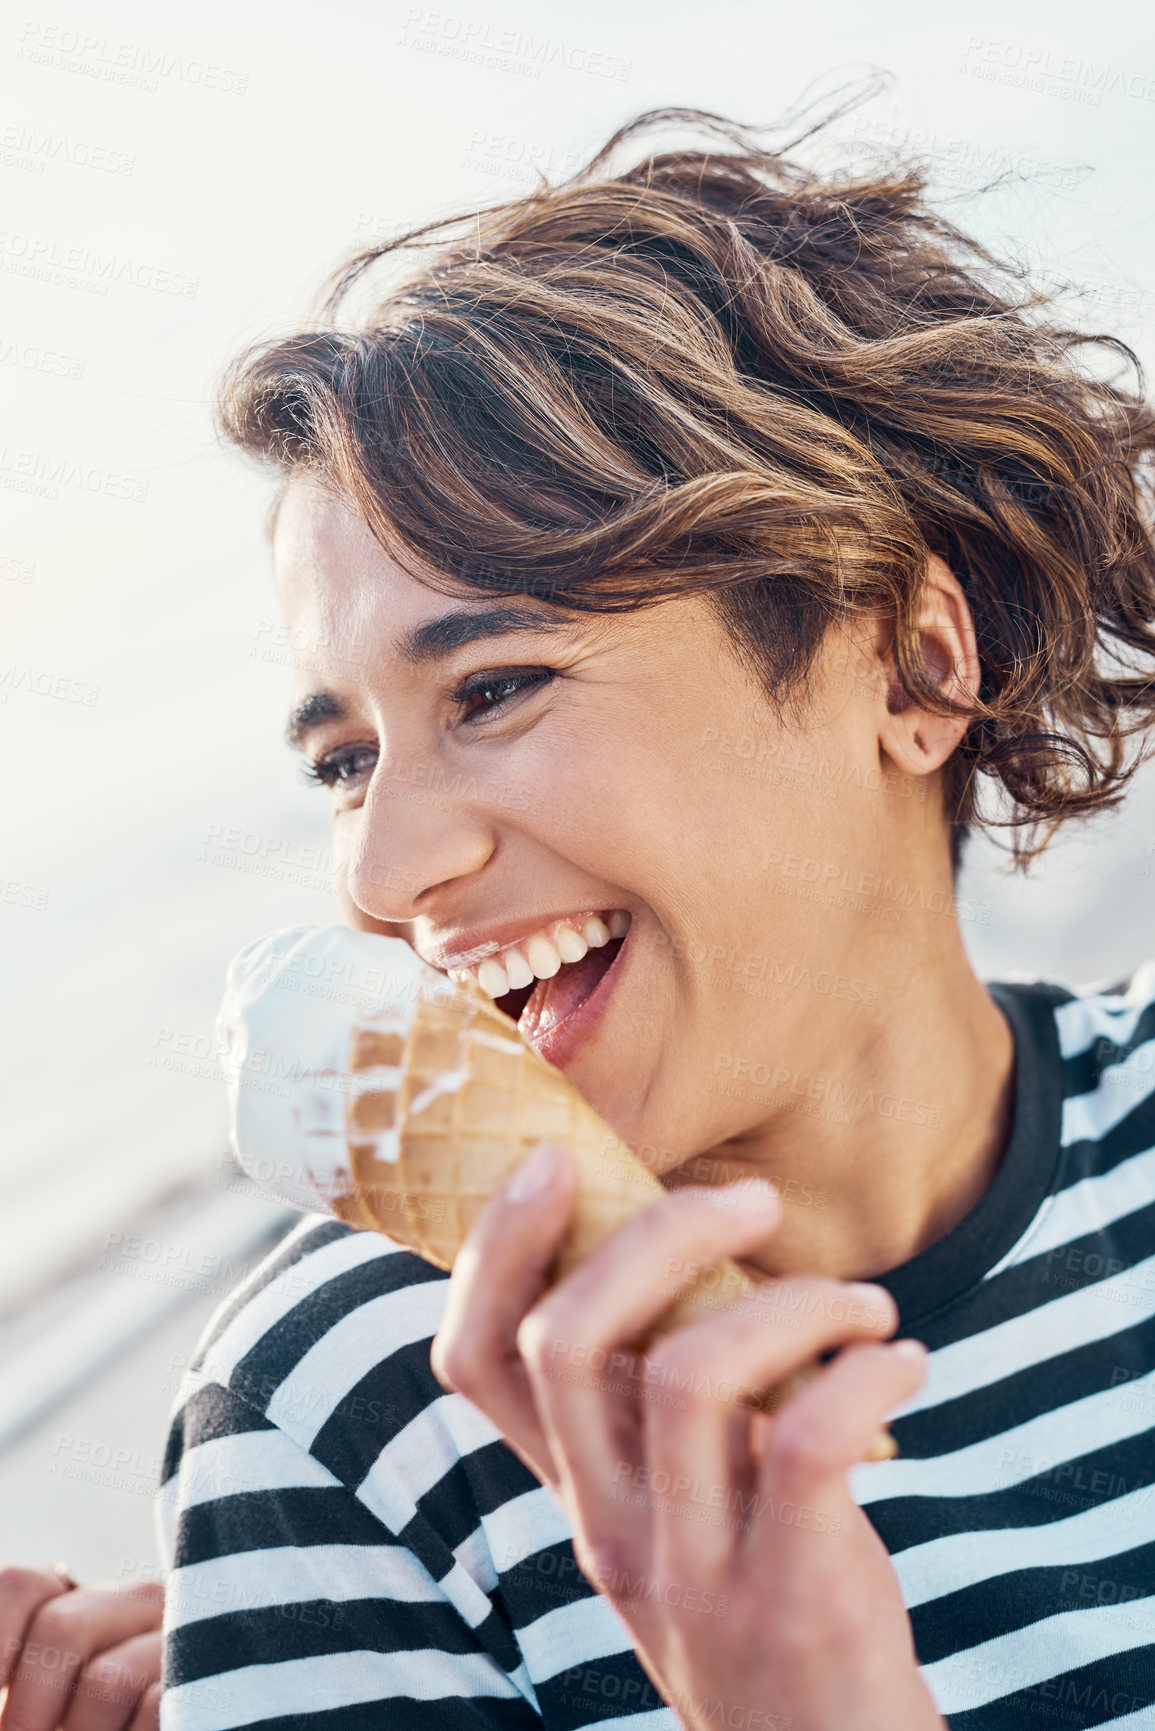 Buy stock photo Cropped shot of a young woman enjoying ice cream outdoors